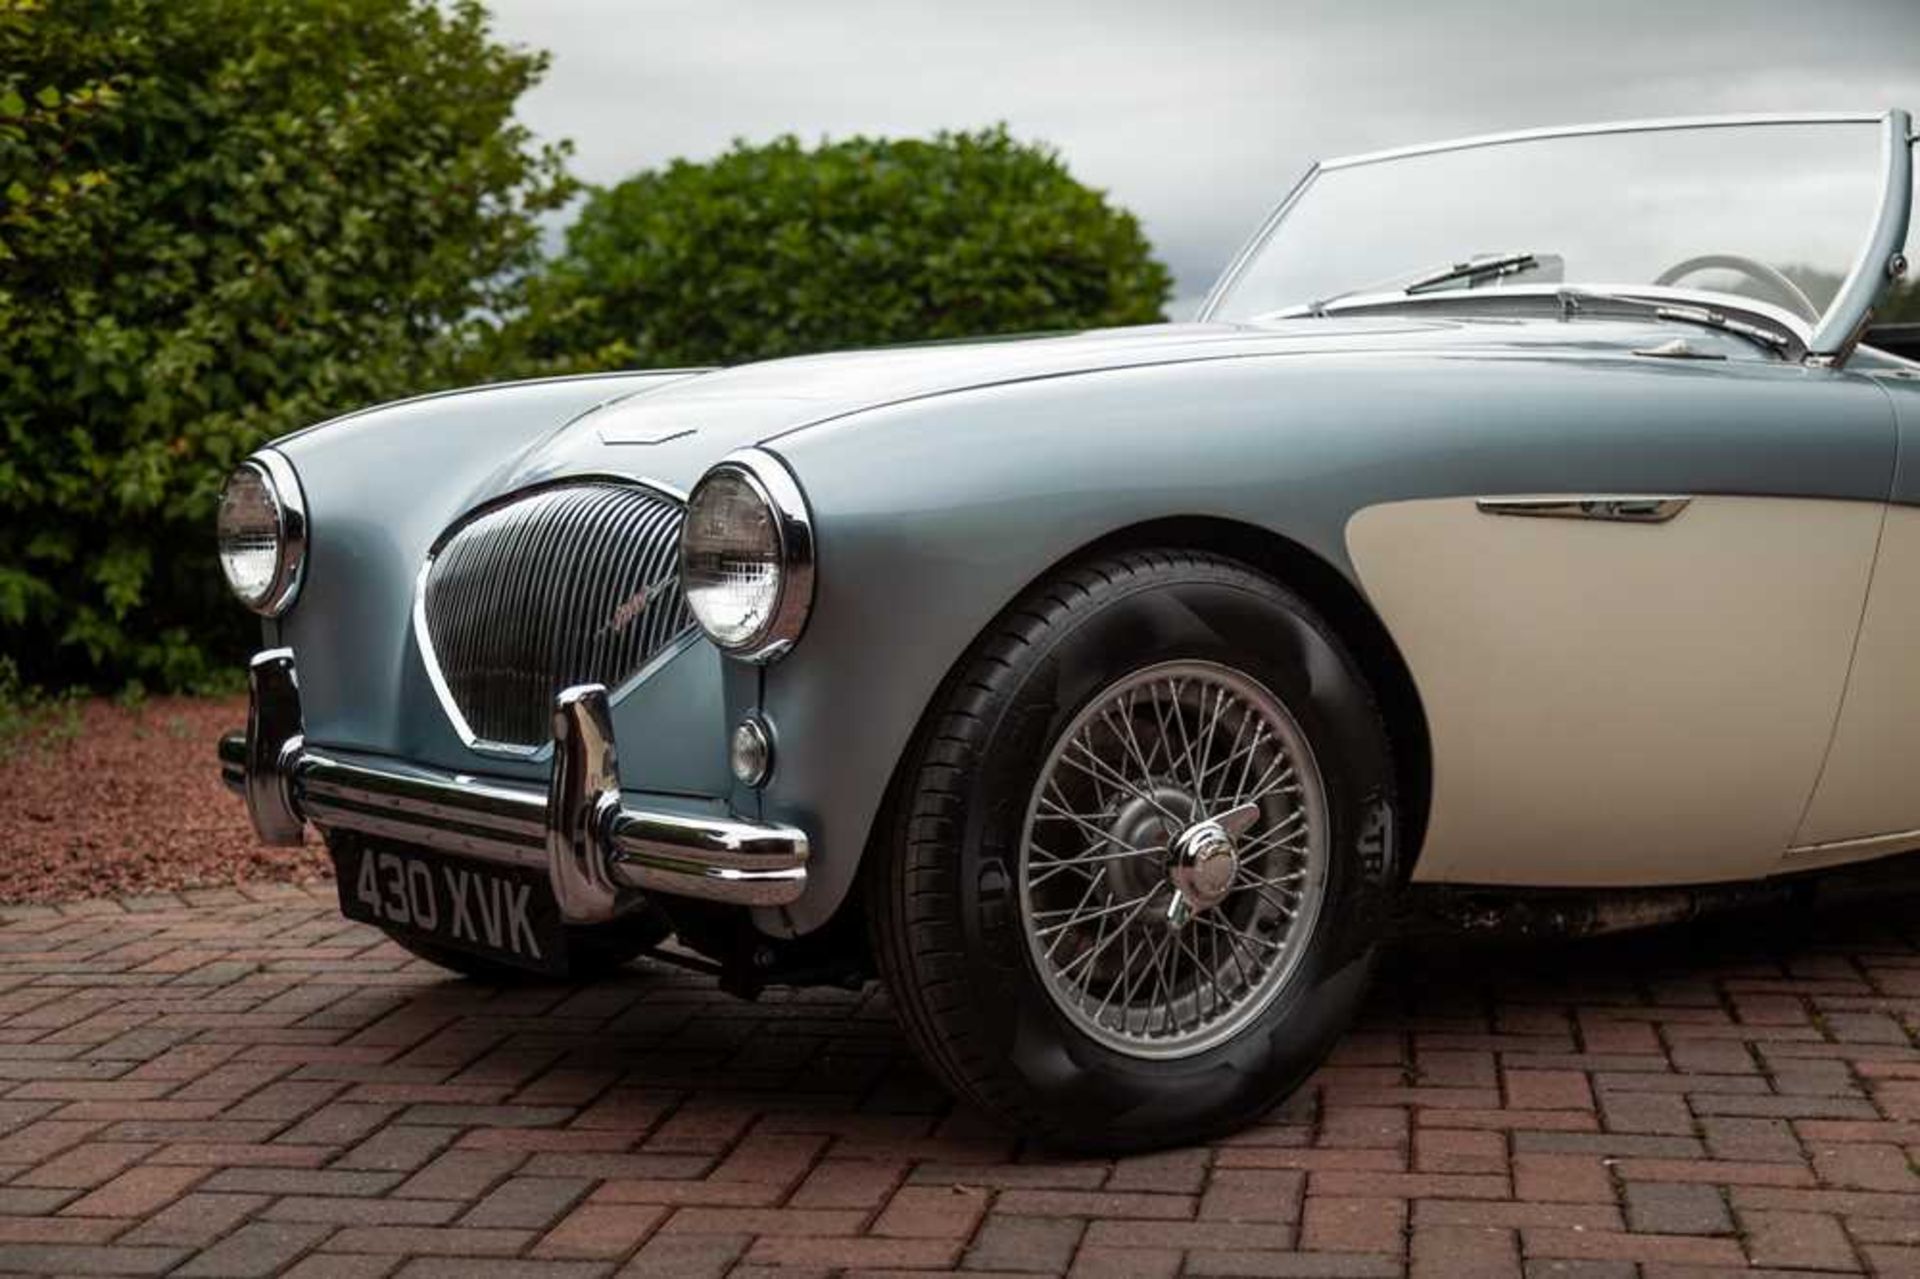 1955 Austin-Healey 100/4 Subtly Upgraded with 5-Speed Transmission and Front Disc Brakes - Image 12 of 54